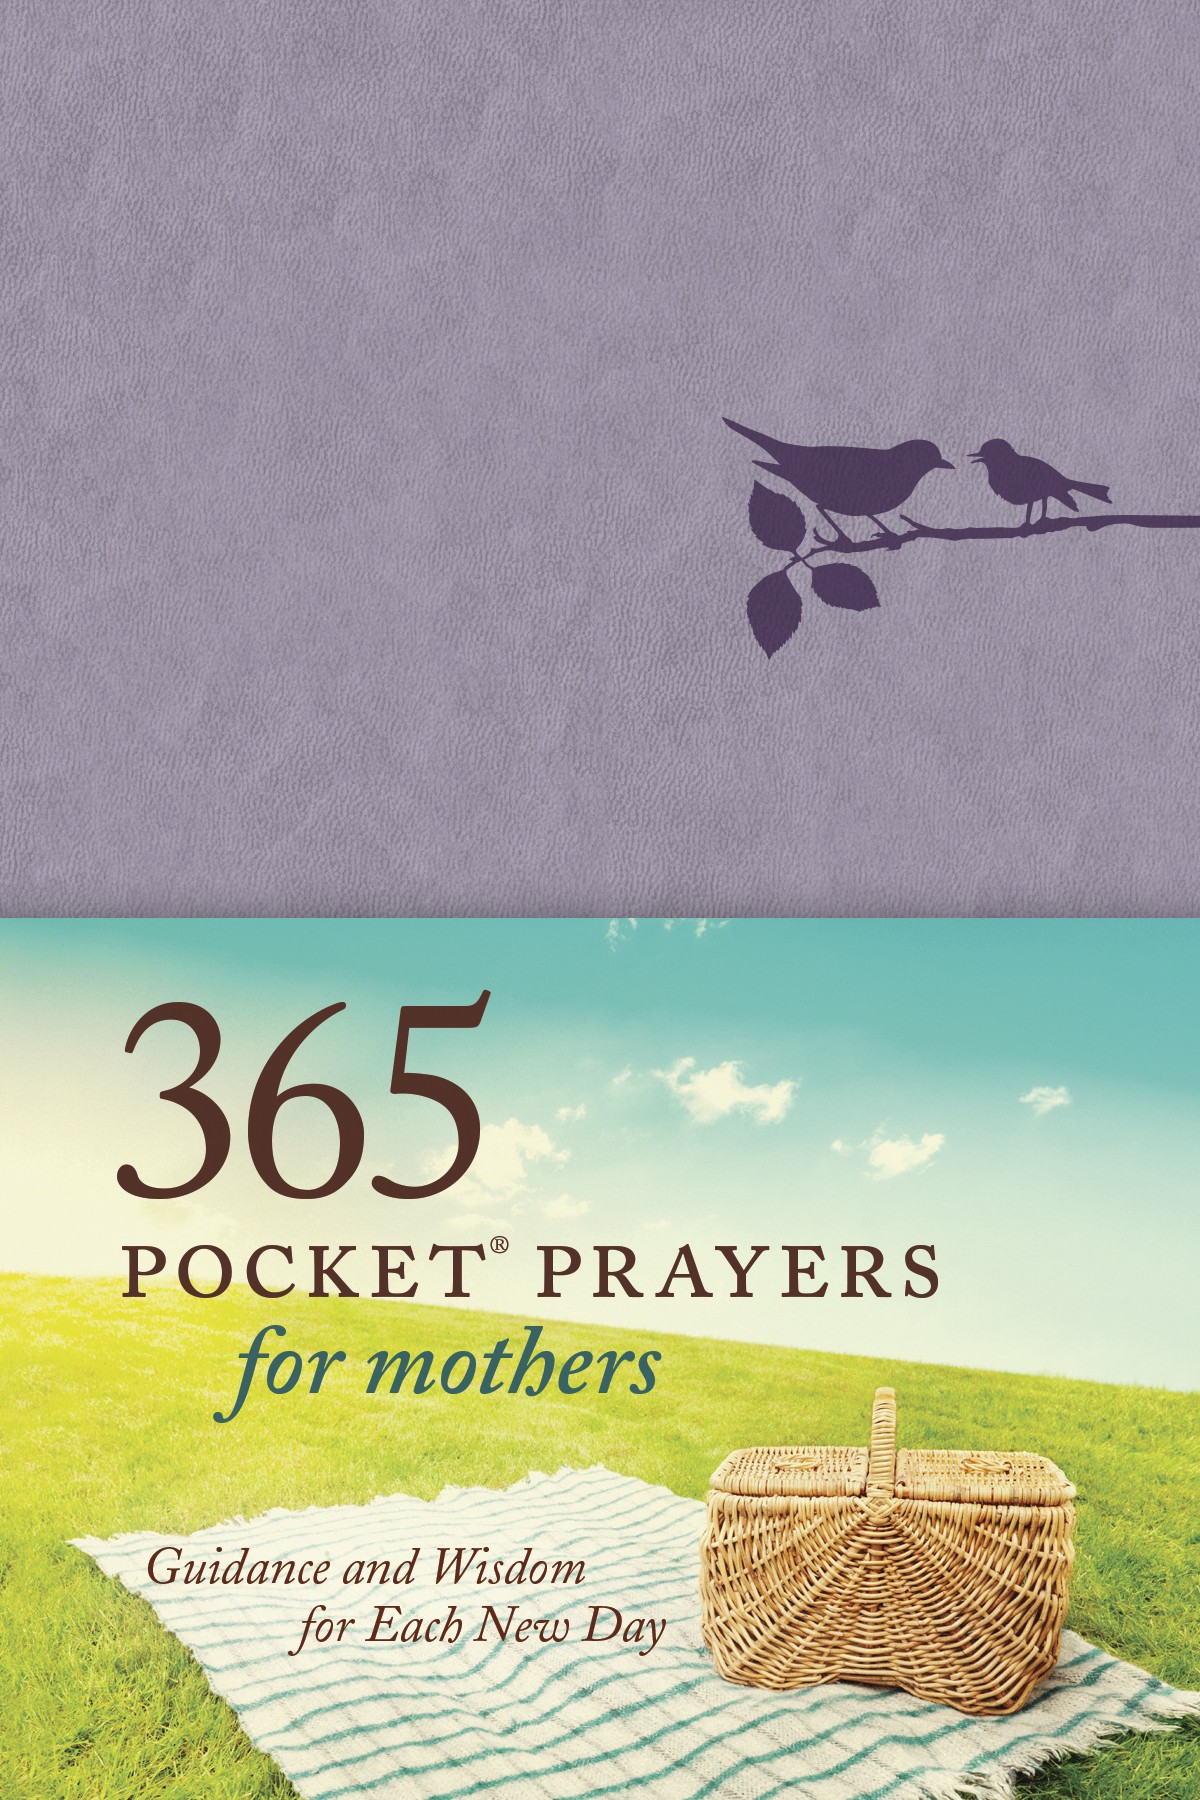  365 Pocket Prayers for Mothers